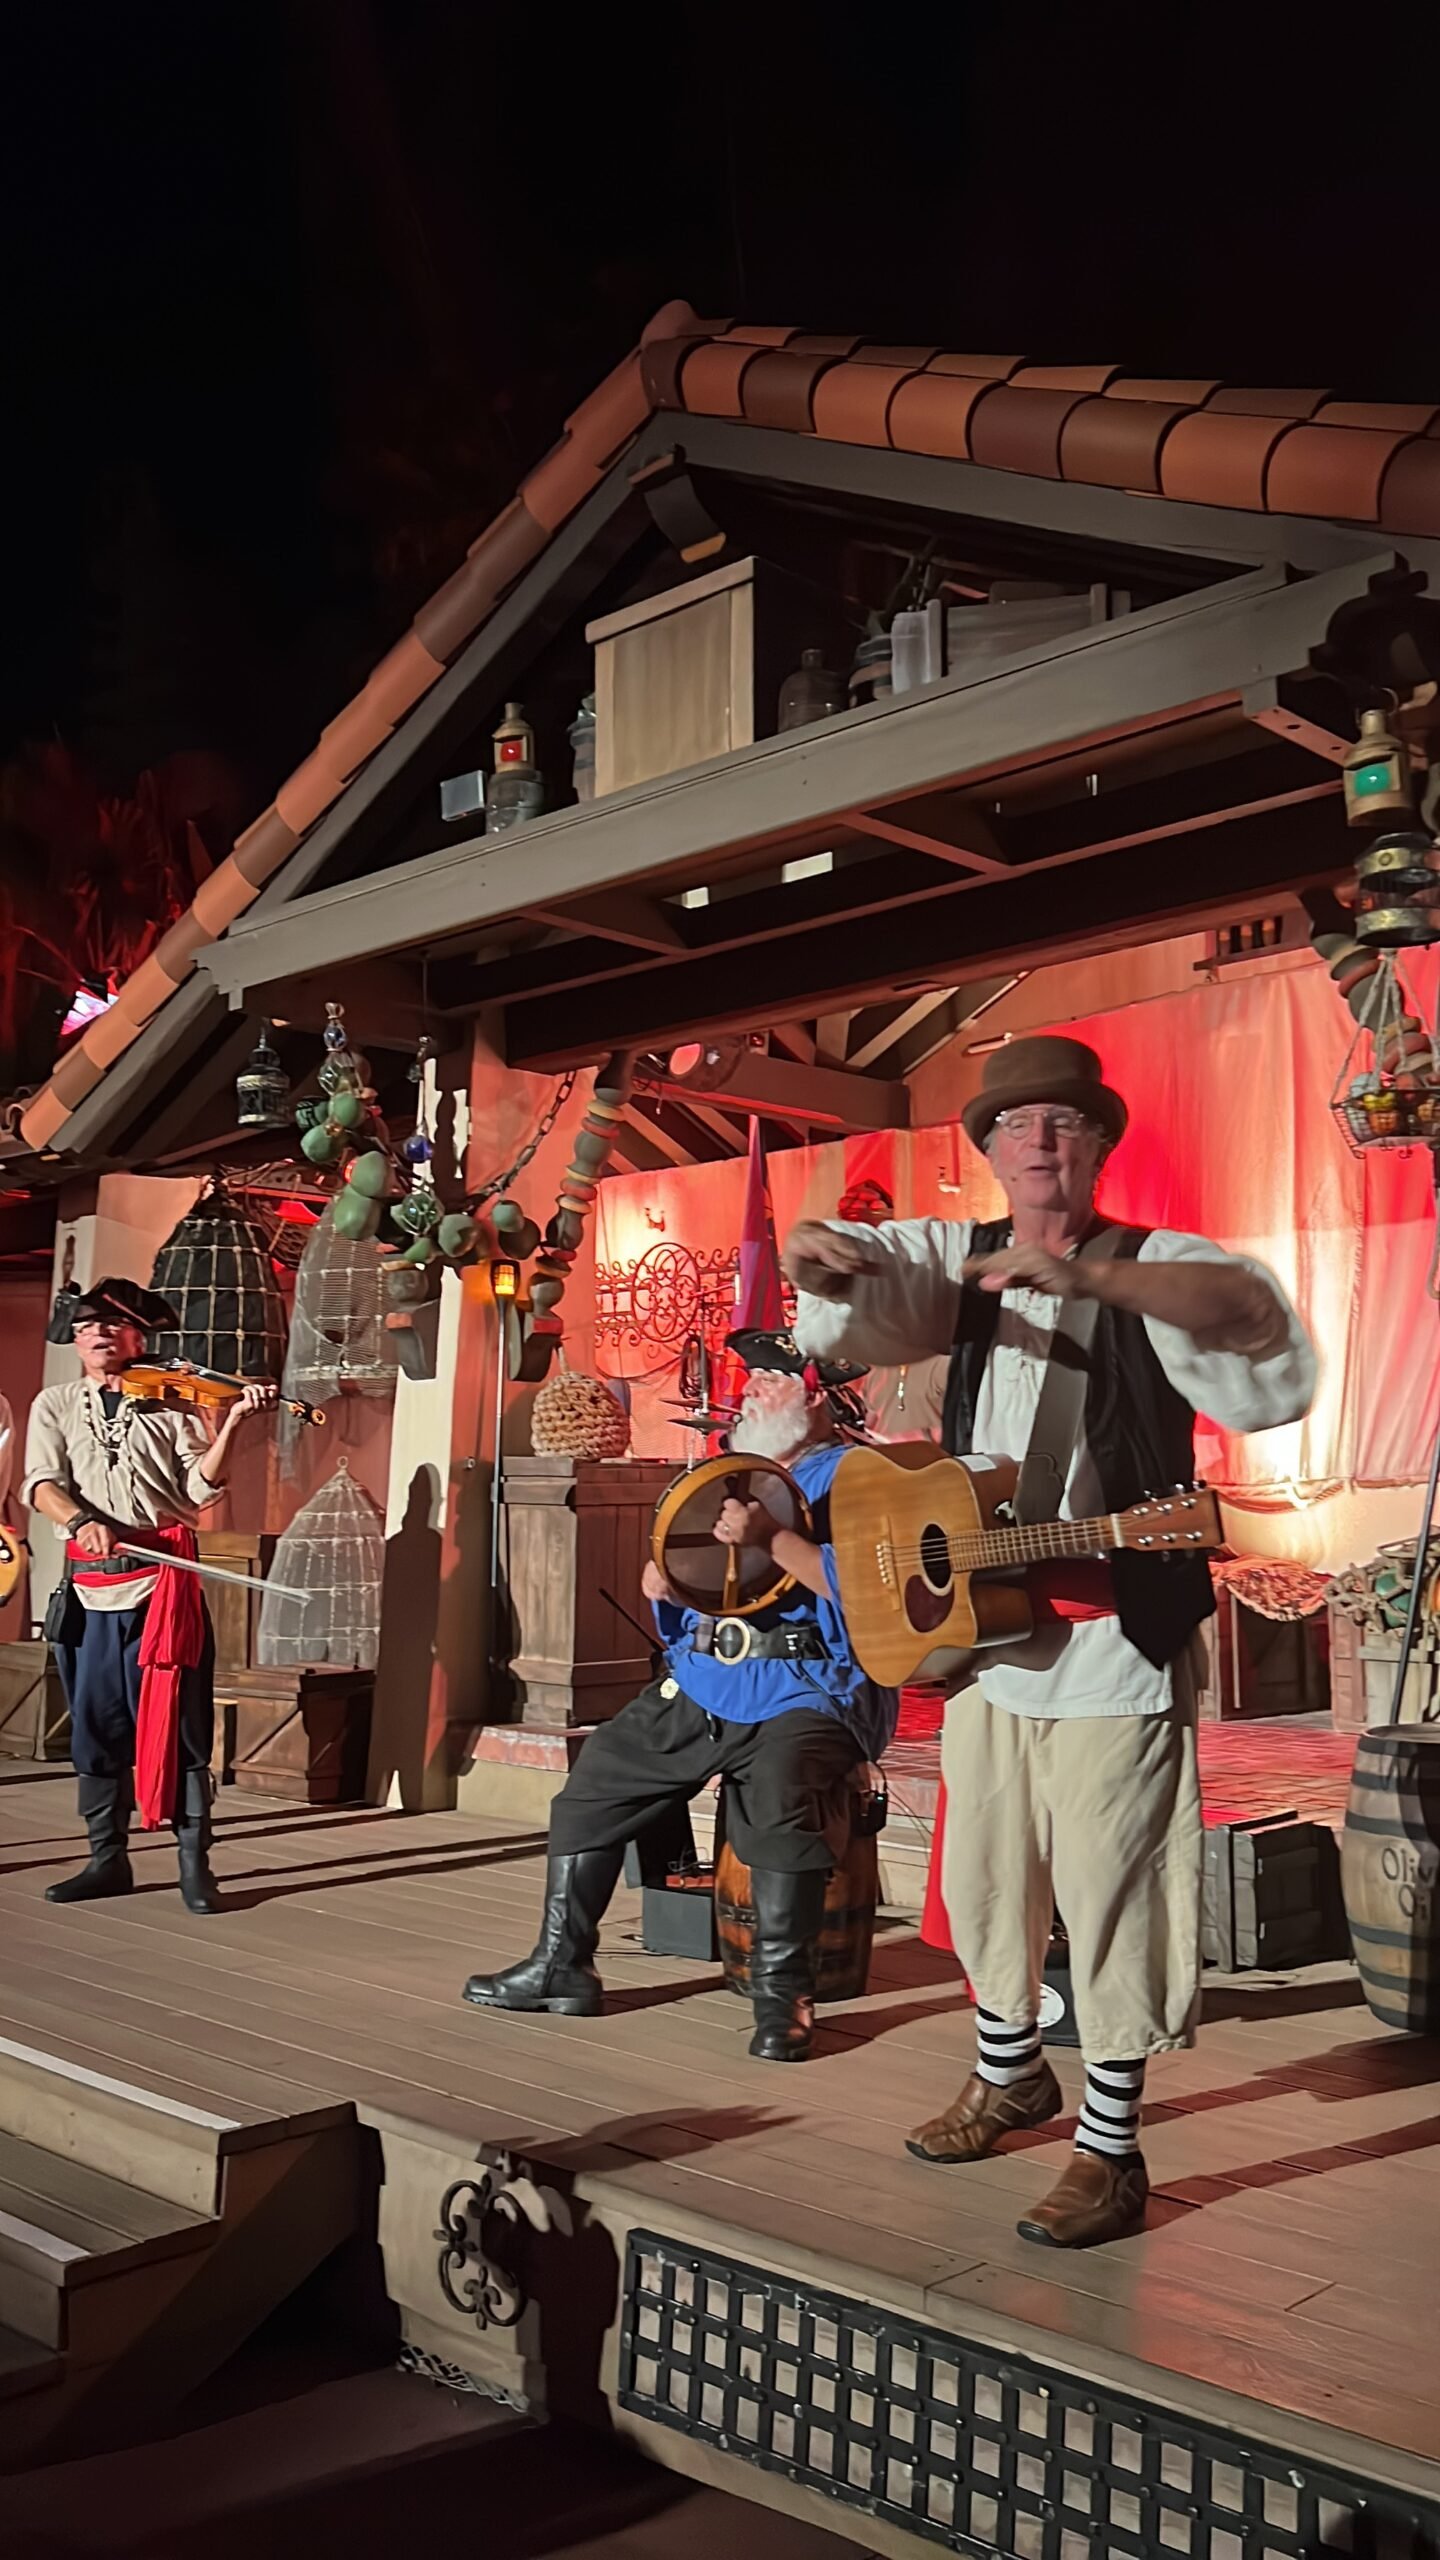 Pirate band in Adventureland at Mickey's Not So Scary Halloween Party